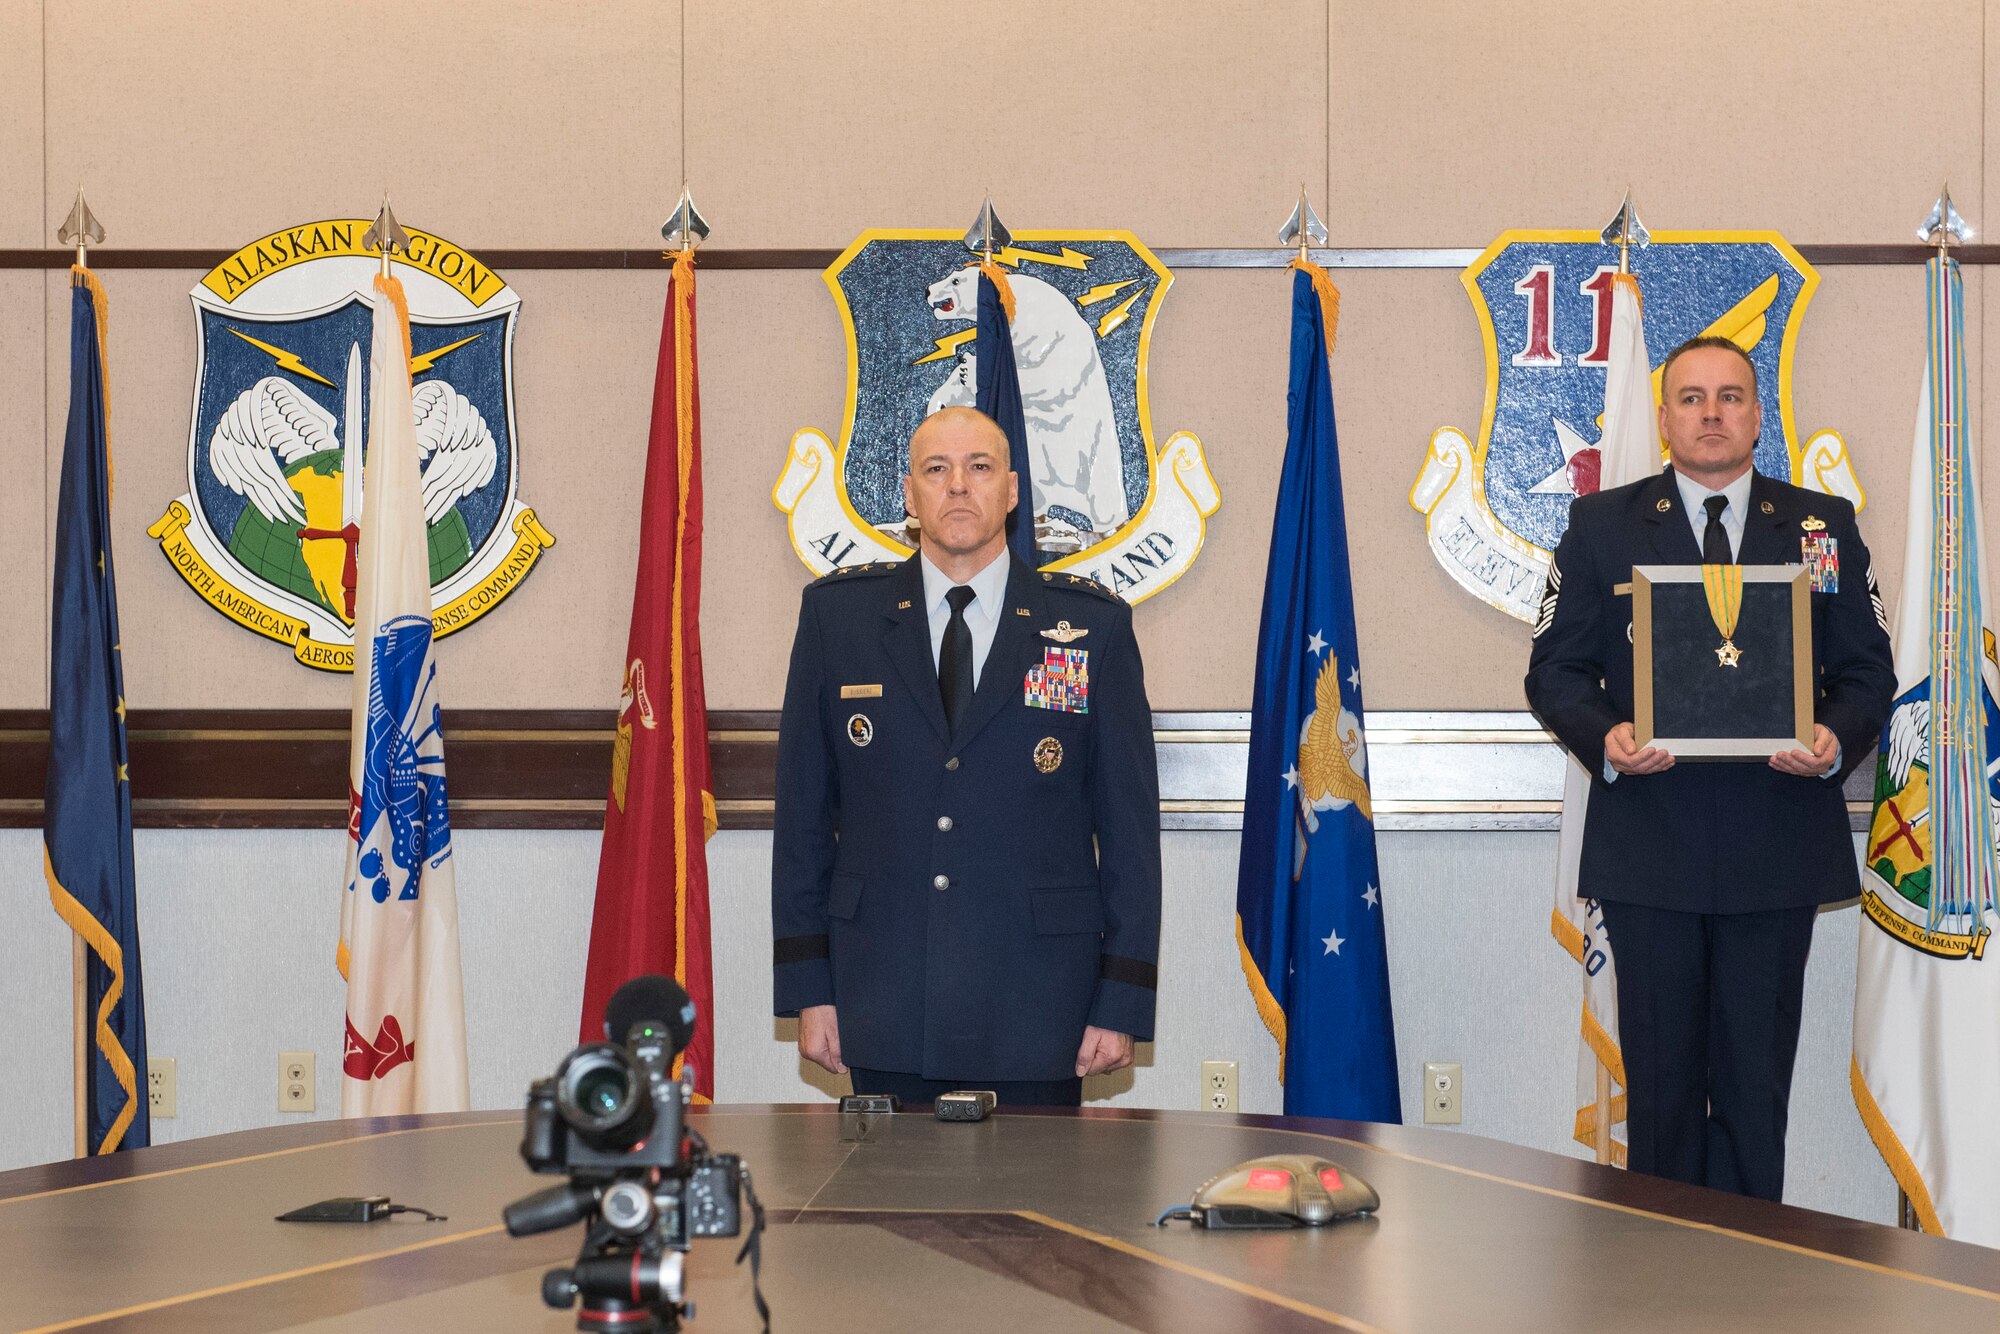 U.S. Air Force Lt. Gen. Thomas A. Bussiere is awarded the Alaska Legion of Merit during a change of command ceremony April 20, 2020, at Joint Base Elmendorf-Richardson, Alaska. Bussiere received the medal from Mike Dunleavy, Governor of the state of Alaska, who was unable to attend the event. The Alaska Legion of Merit medal honors members who carry out extraordinarily distinguished or meritorious service on behalf of the State. Due to physical restrictions of the ongoing COVID-19 pandemic, the virtual change of command ceremony was presided over via video teleconference by Air Force Gen. Terrence O’Shaughnessy, commander of the North American Aerospace Defense Command and United States Northern Command, and Air Force Gen. Charles Q. Brown, Pacific Air Forces commander.